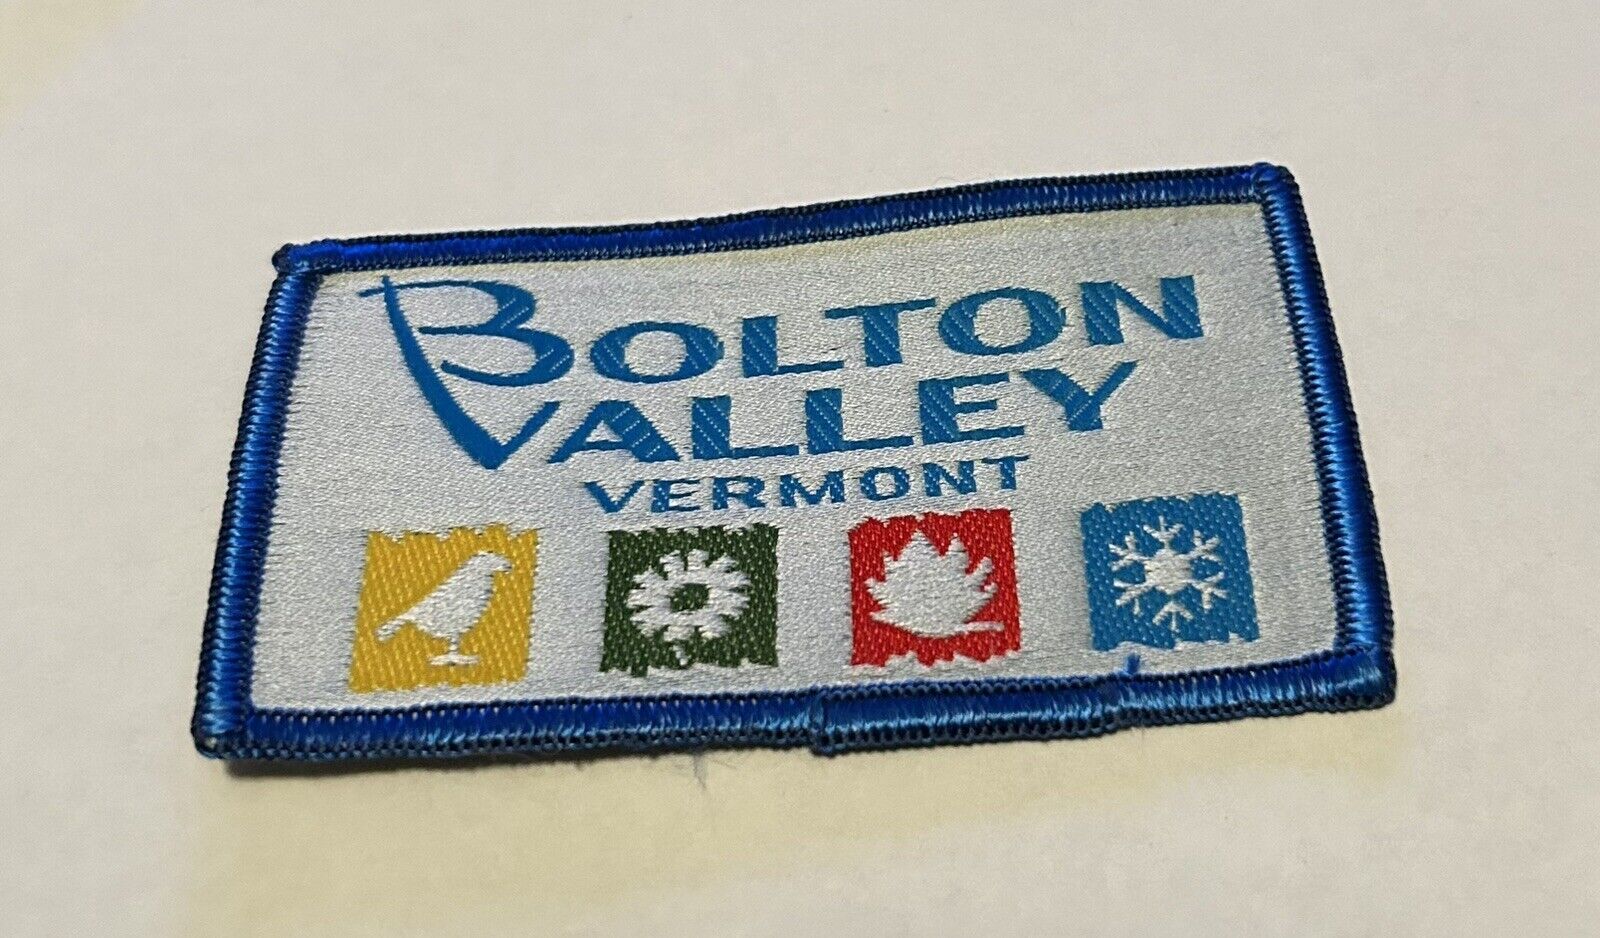 Bolton Valley Vermont Ski Resort Souvenir Embroidered Patch Very Good Condition